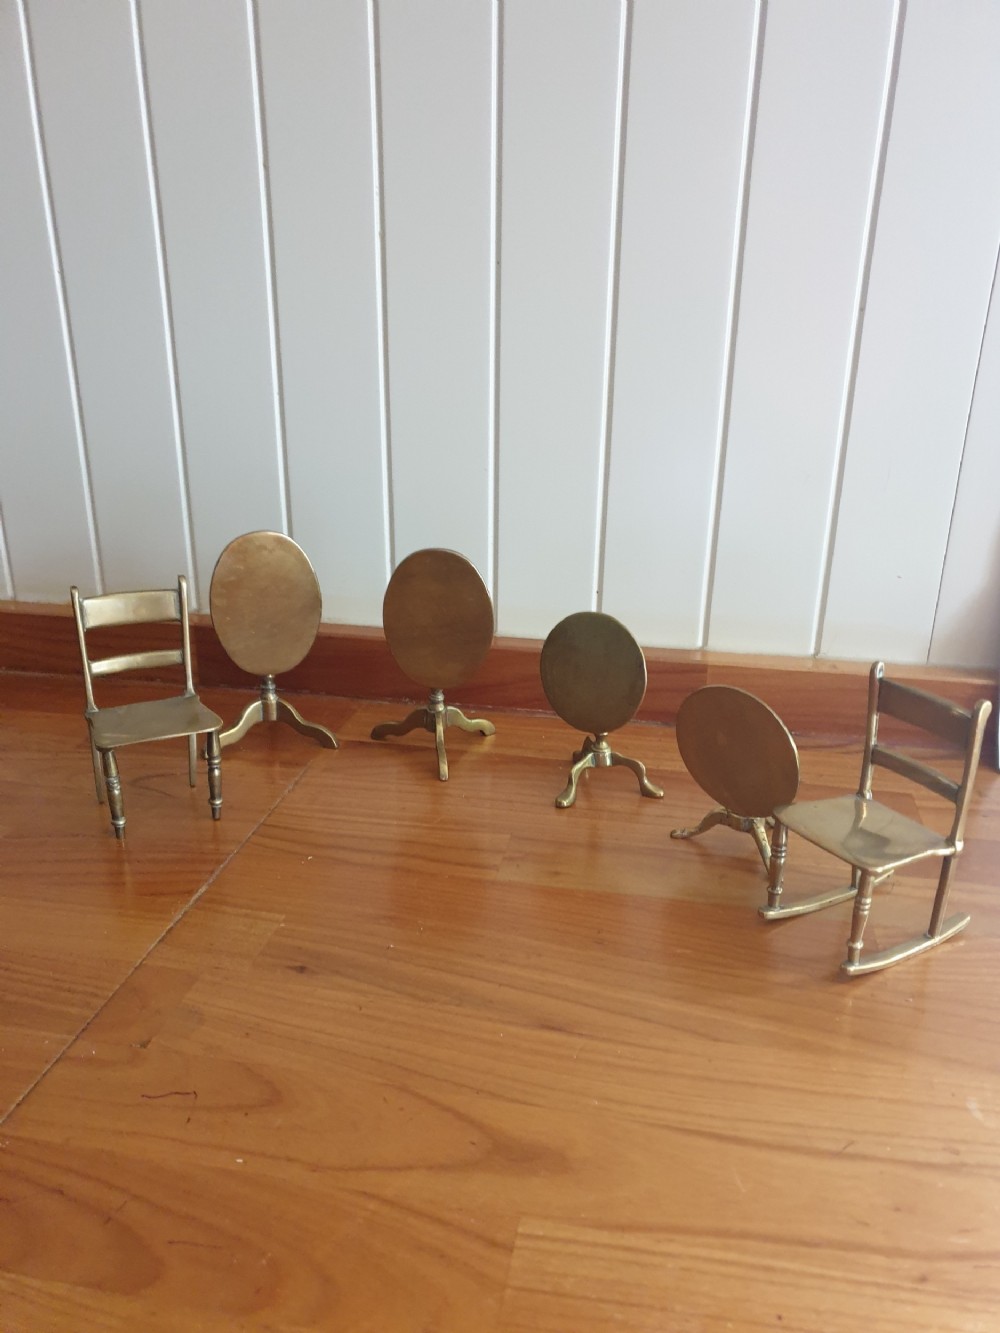 antique minature group of brass tripod tables and chairs six in total